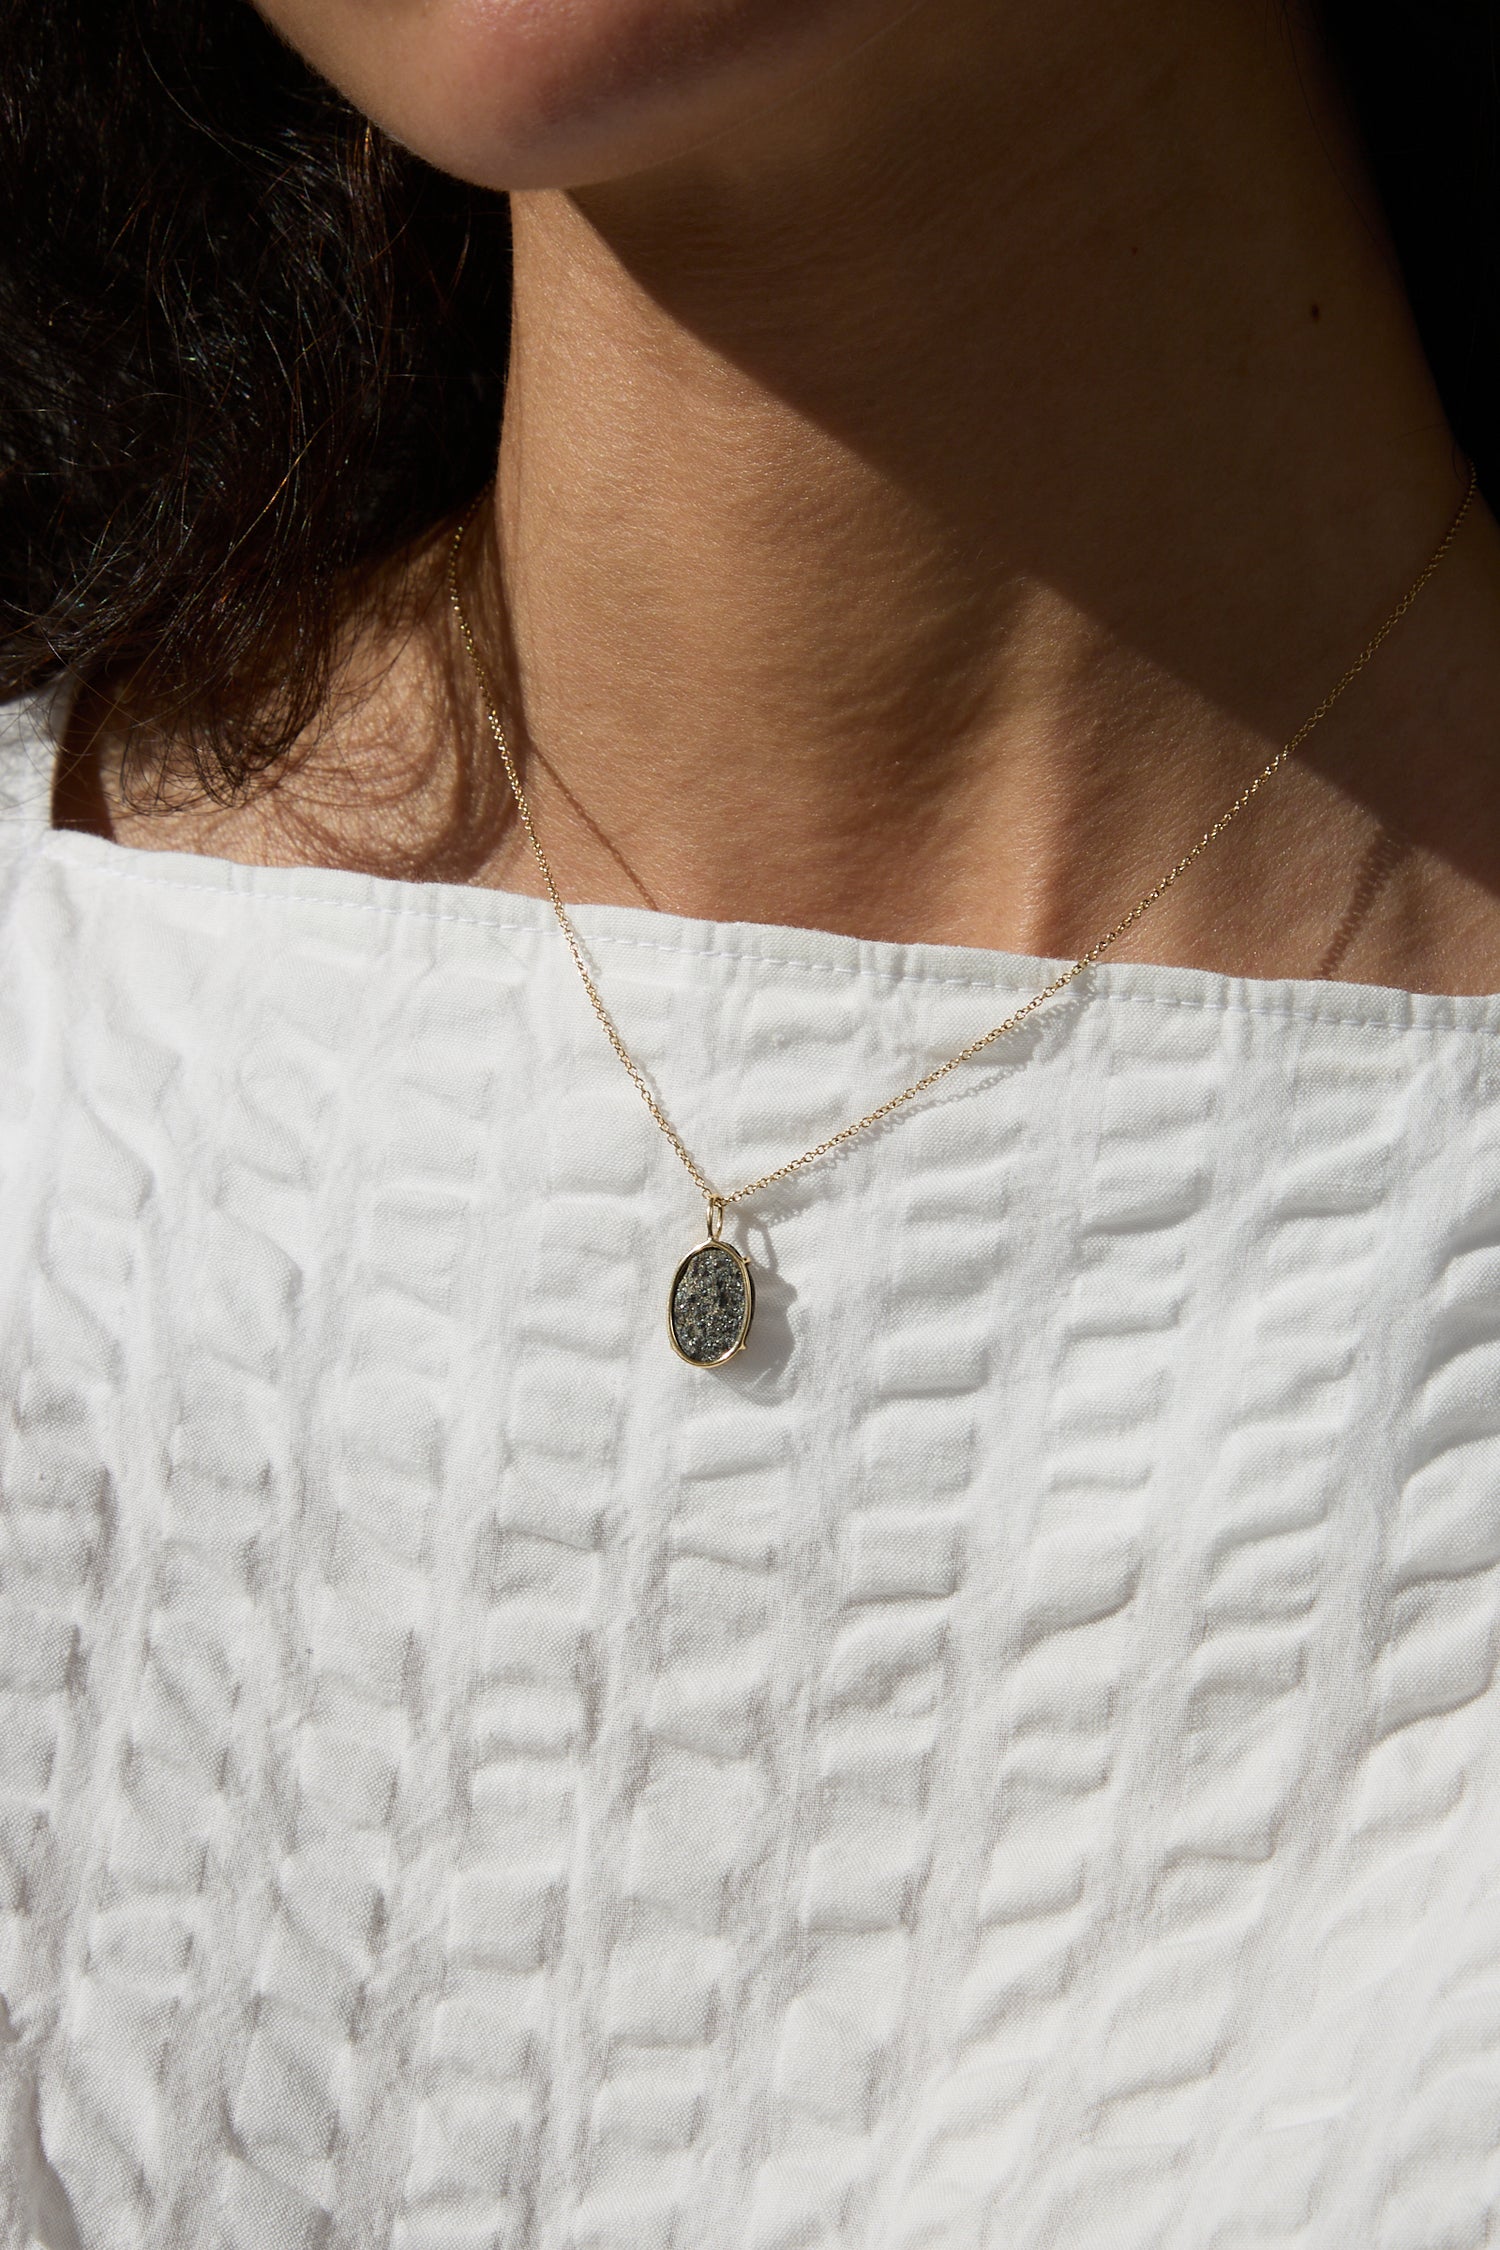 A person wearing a Mary MacGill 14K Floating Necklace in Block Island Stone accentuated by 14k gold.